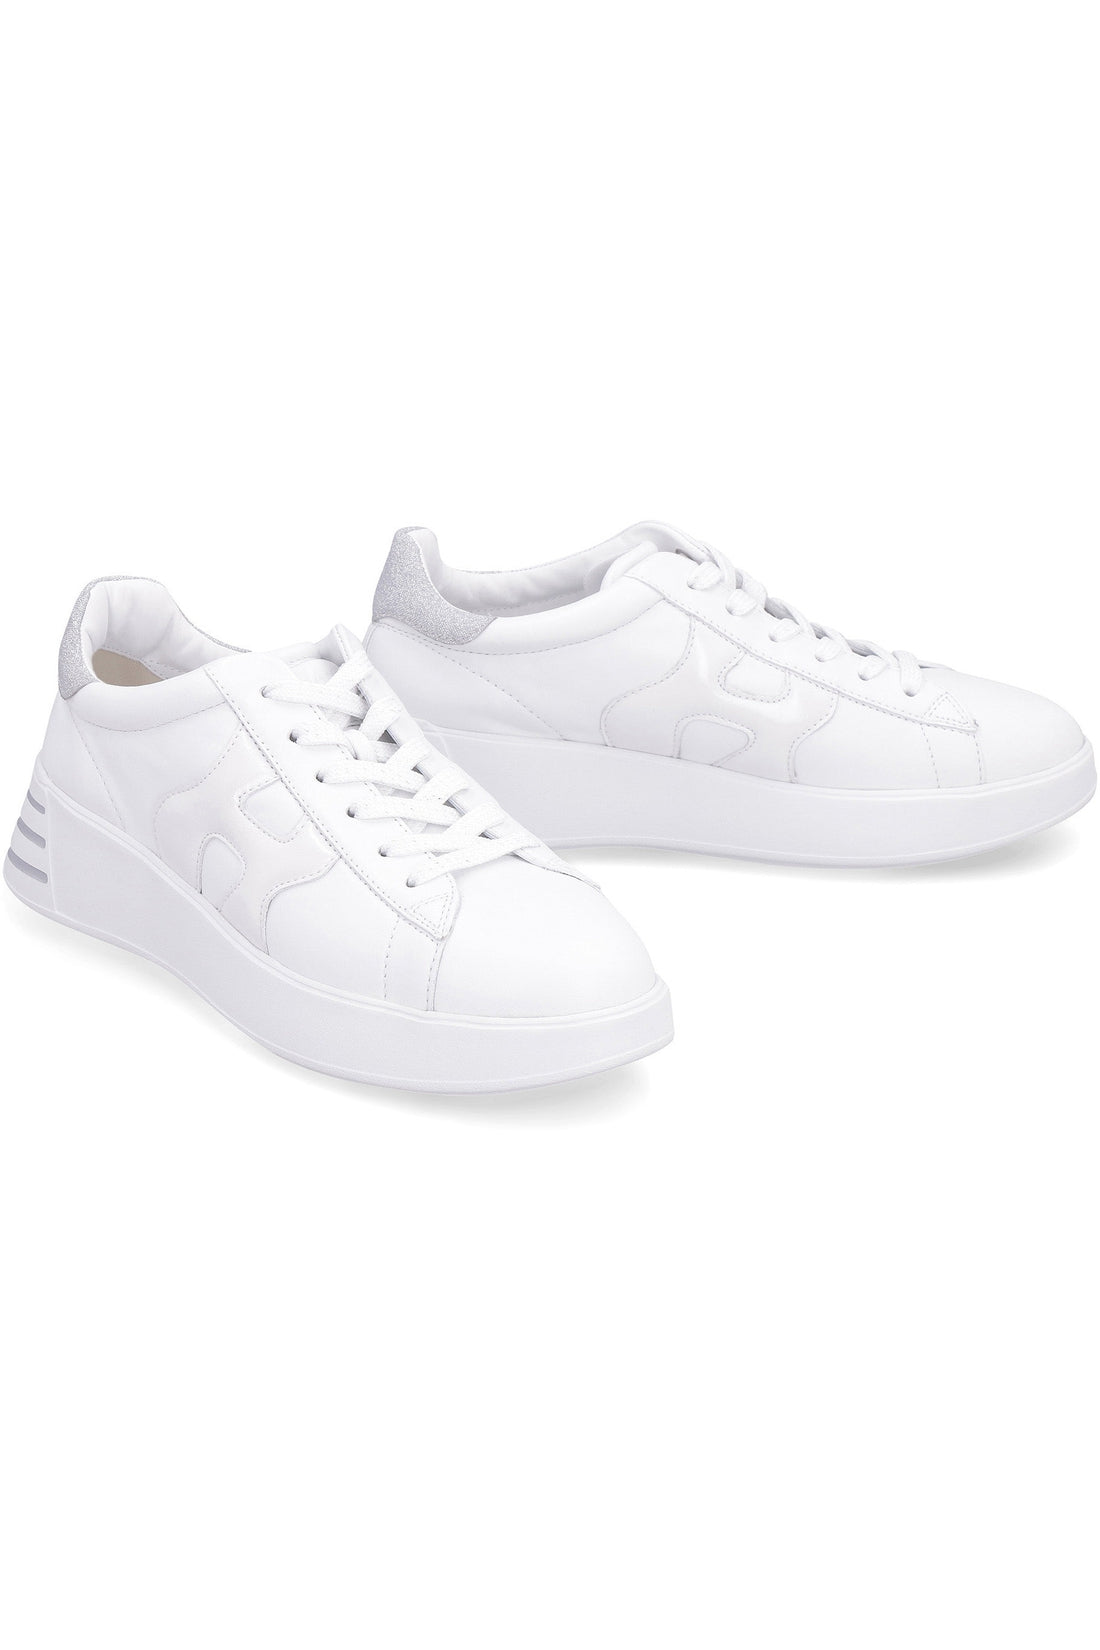 Hogan-OUTLET-SALE-Rebel leather low-top sneakers-ARCHIVIST